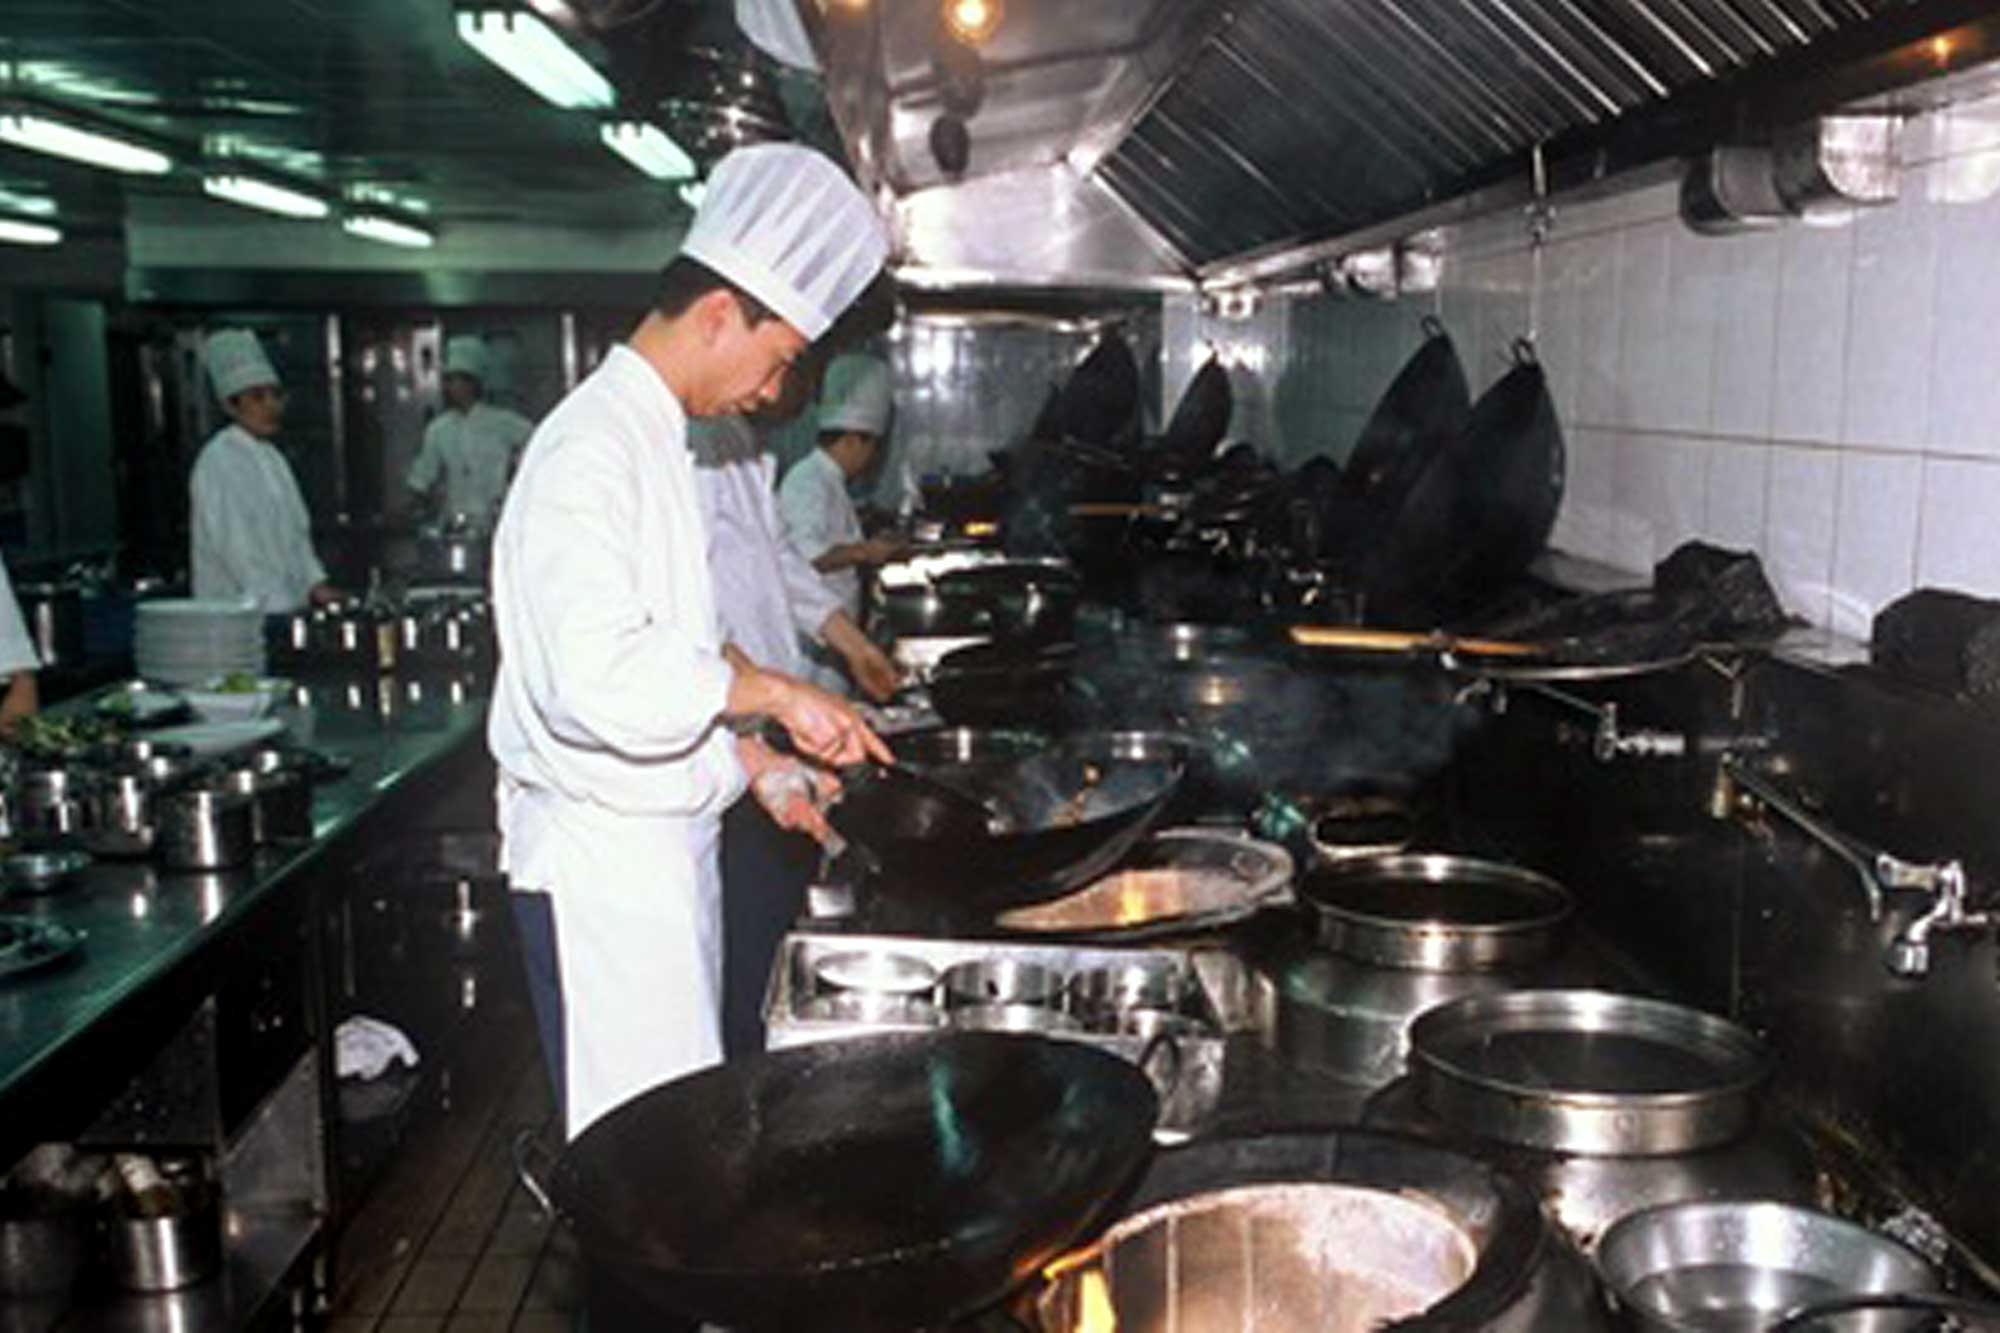 Chefs cooking in a professional kitchen. Some are frying food.